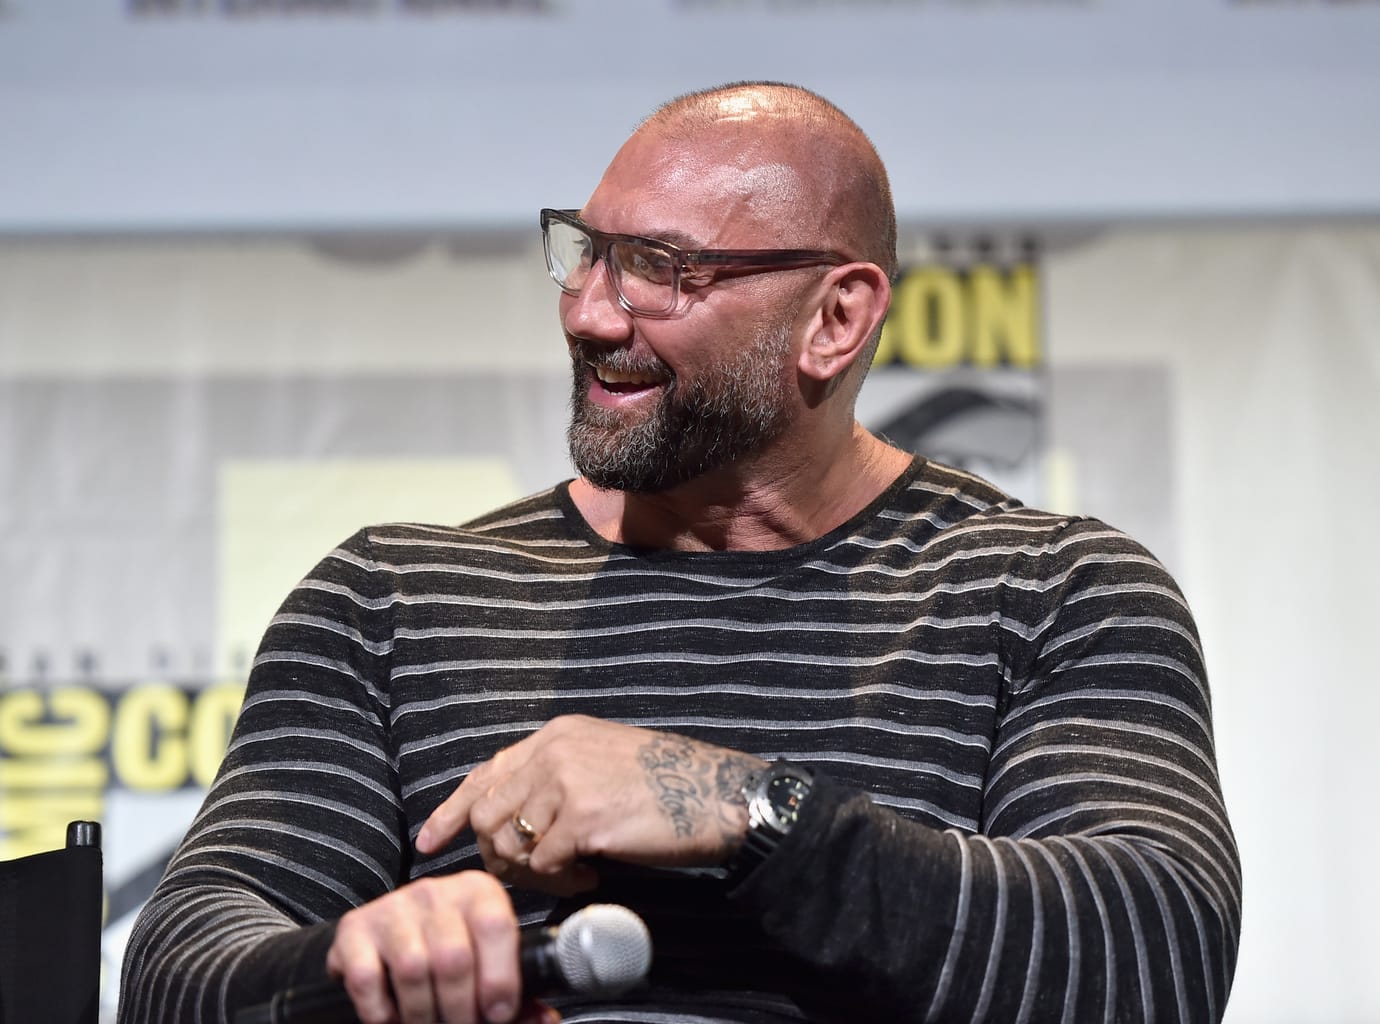 Who's excited about seeing Dave Bautista as Drax in Guardians of the Galaxy Vol. 2? This movie is going to be so amazing!